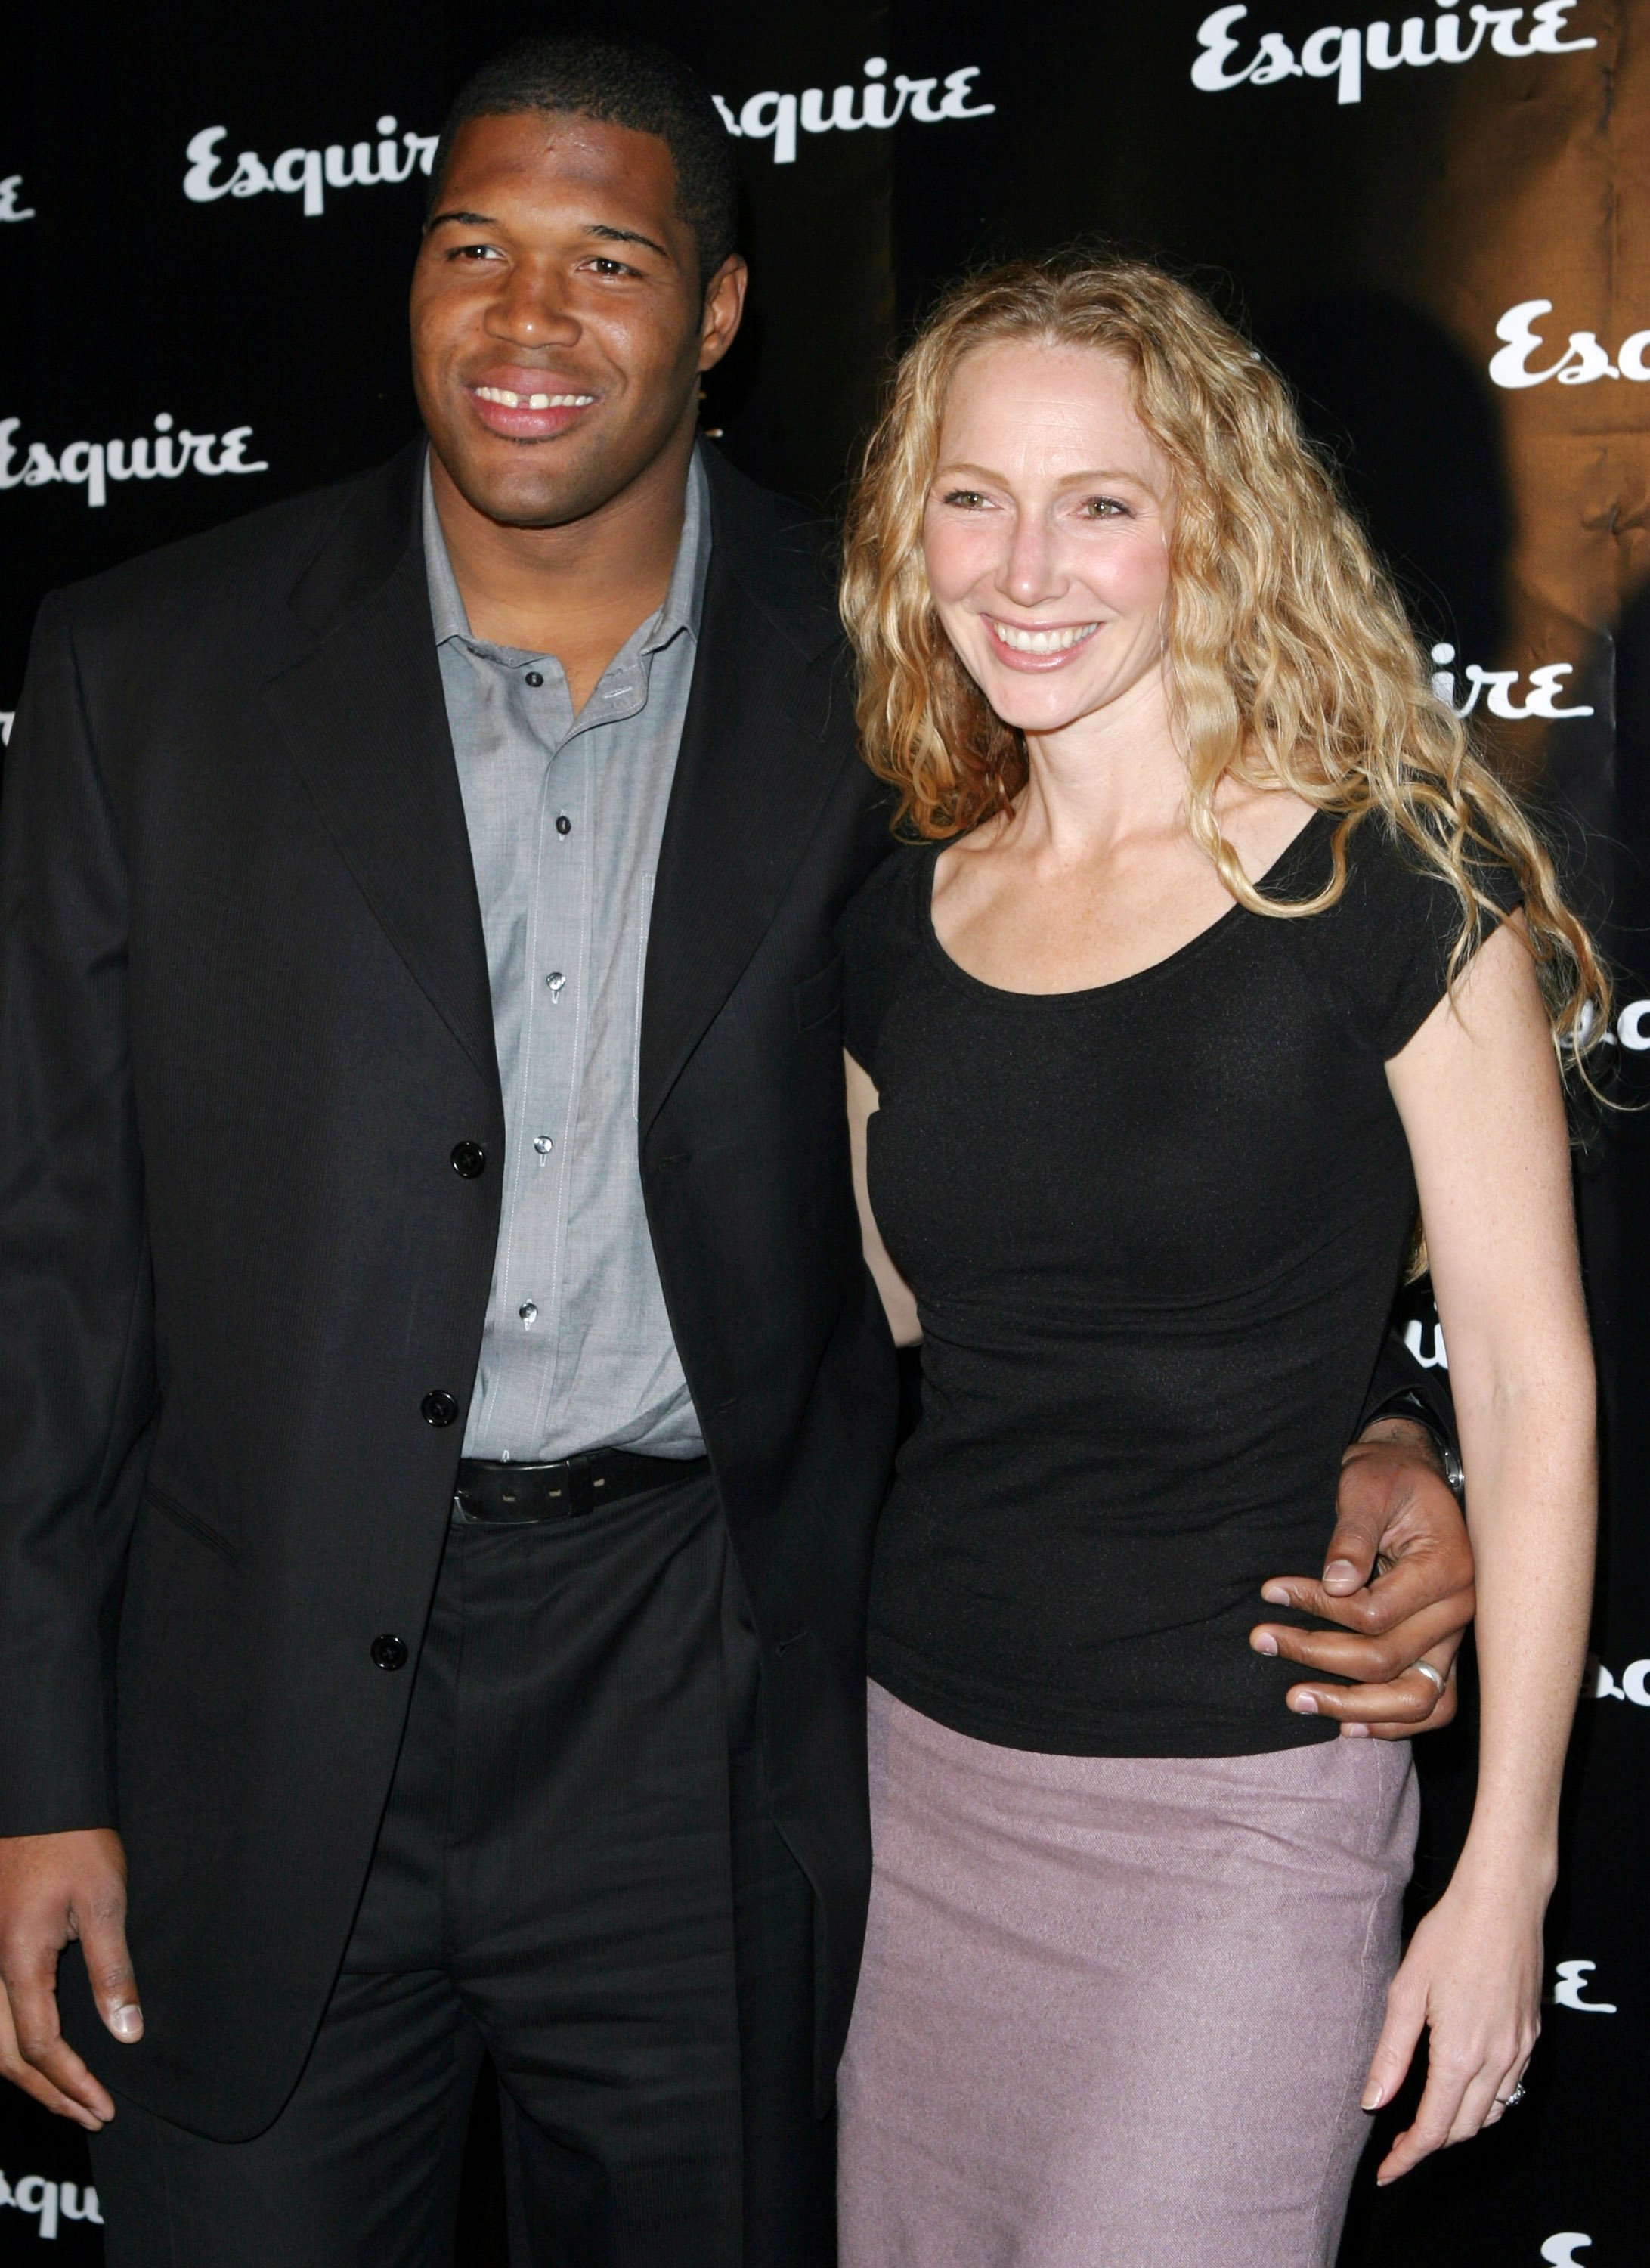 Michael Strahan and wife Jean during the Esquire Apartment Launch Party in New York City, on October 10, 2003. | Source: James Devaney/WireImage/Getty Images